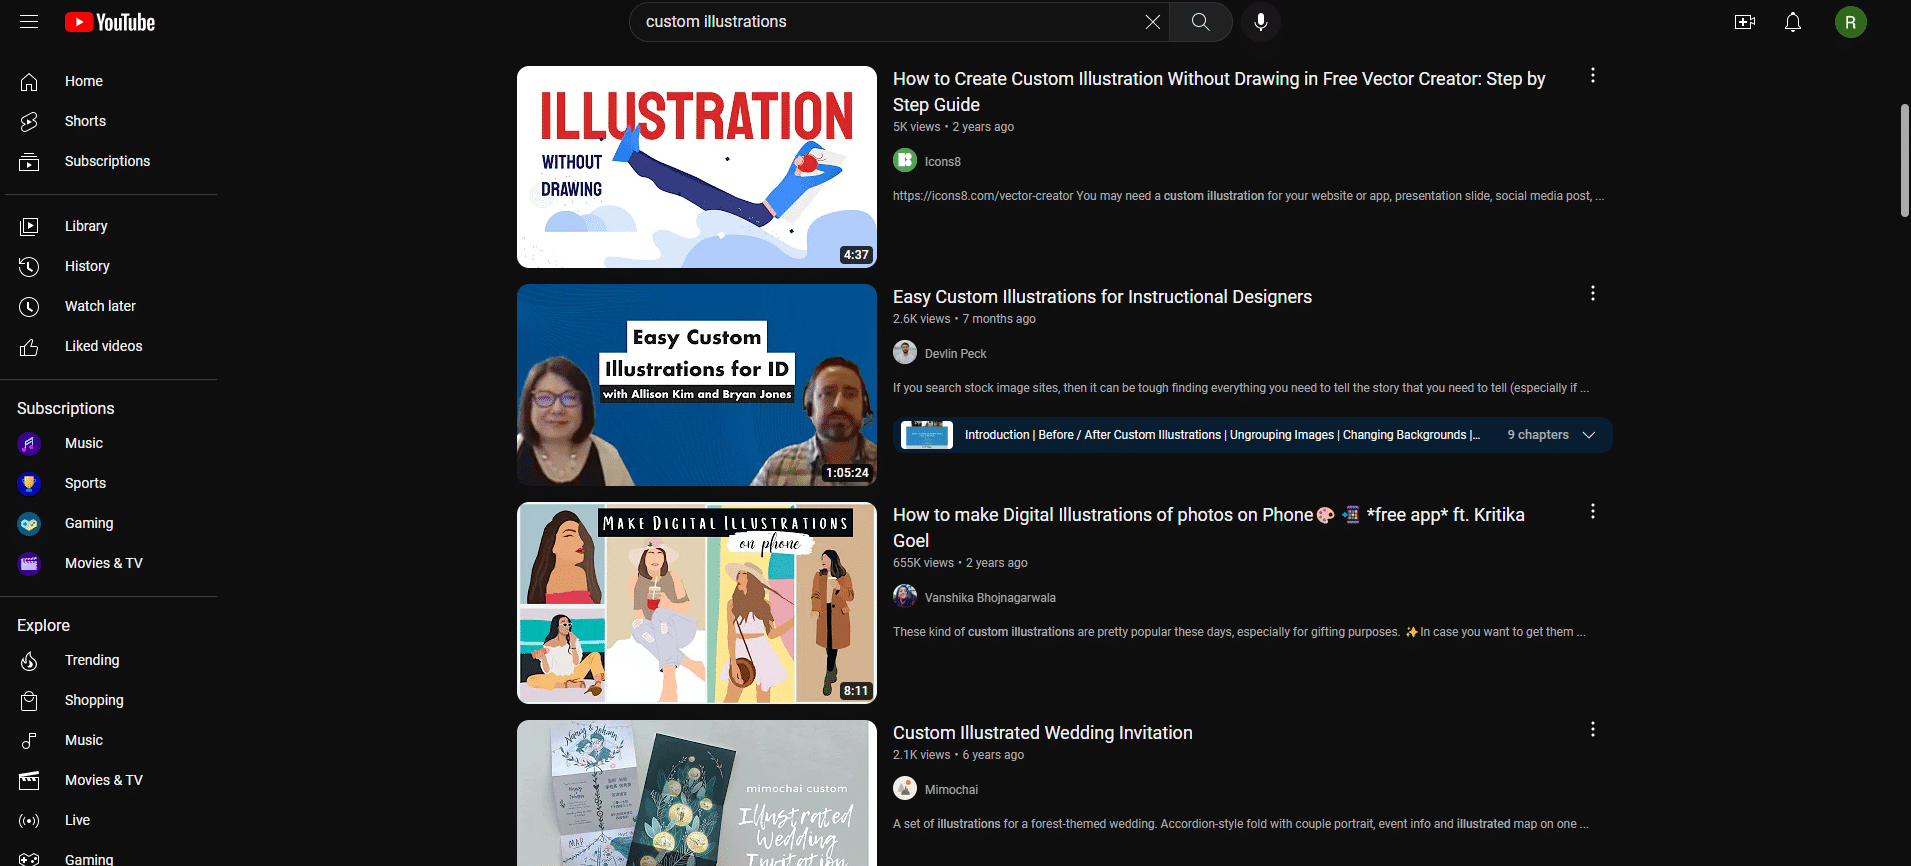 screen shot of youtube with results for custom illustration videos thumbnails